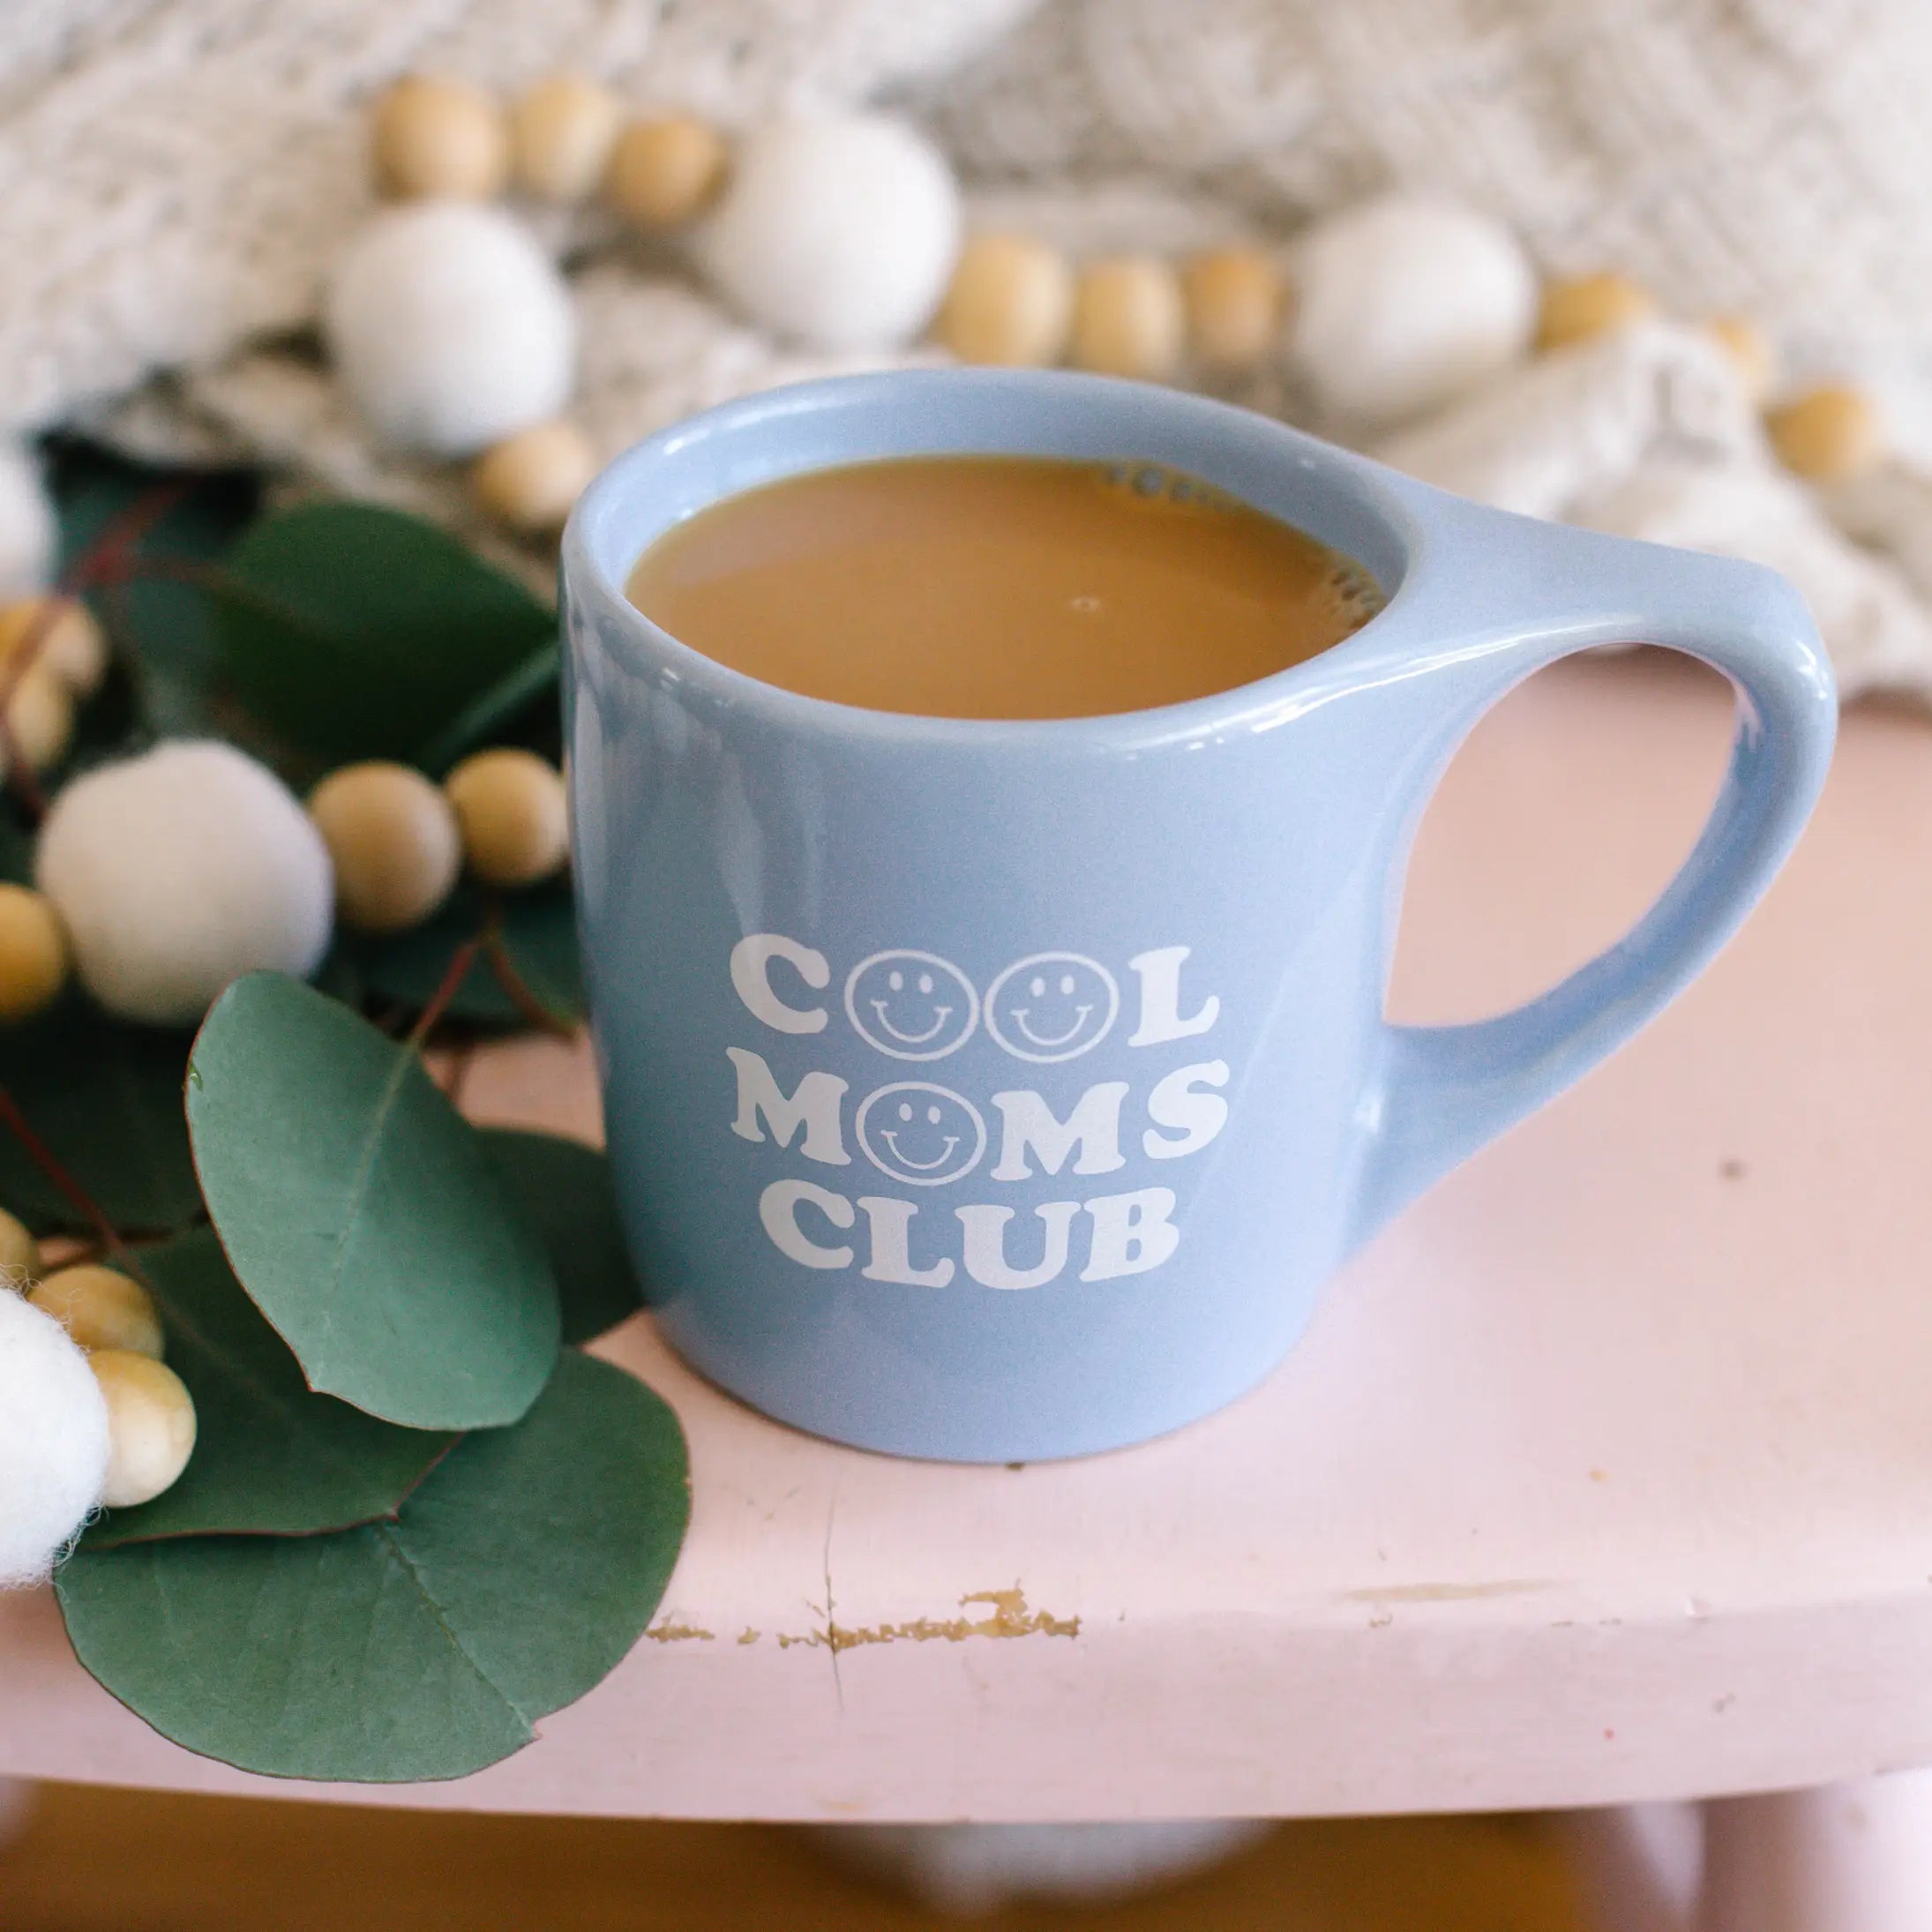 Cool Moms Club Ceramic Mug in Pastel Blue with Smiley Face from Rachel Allene